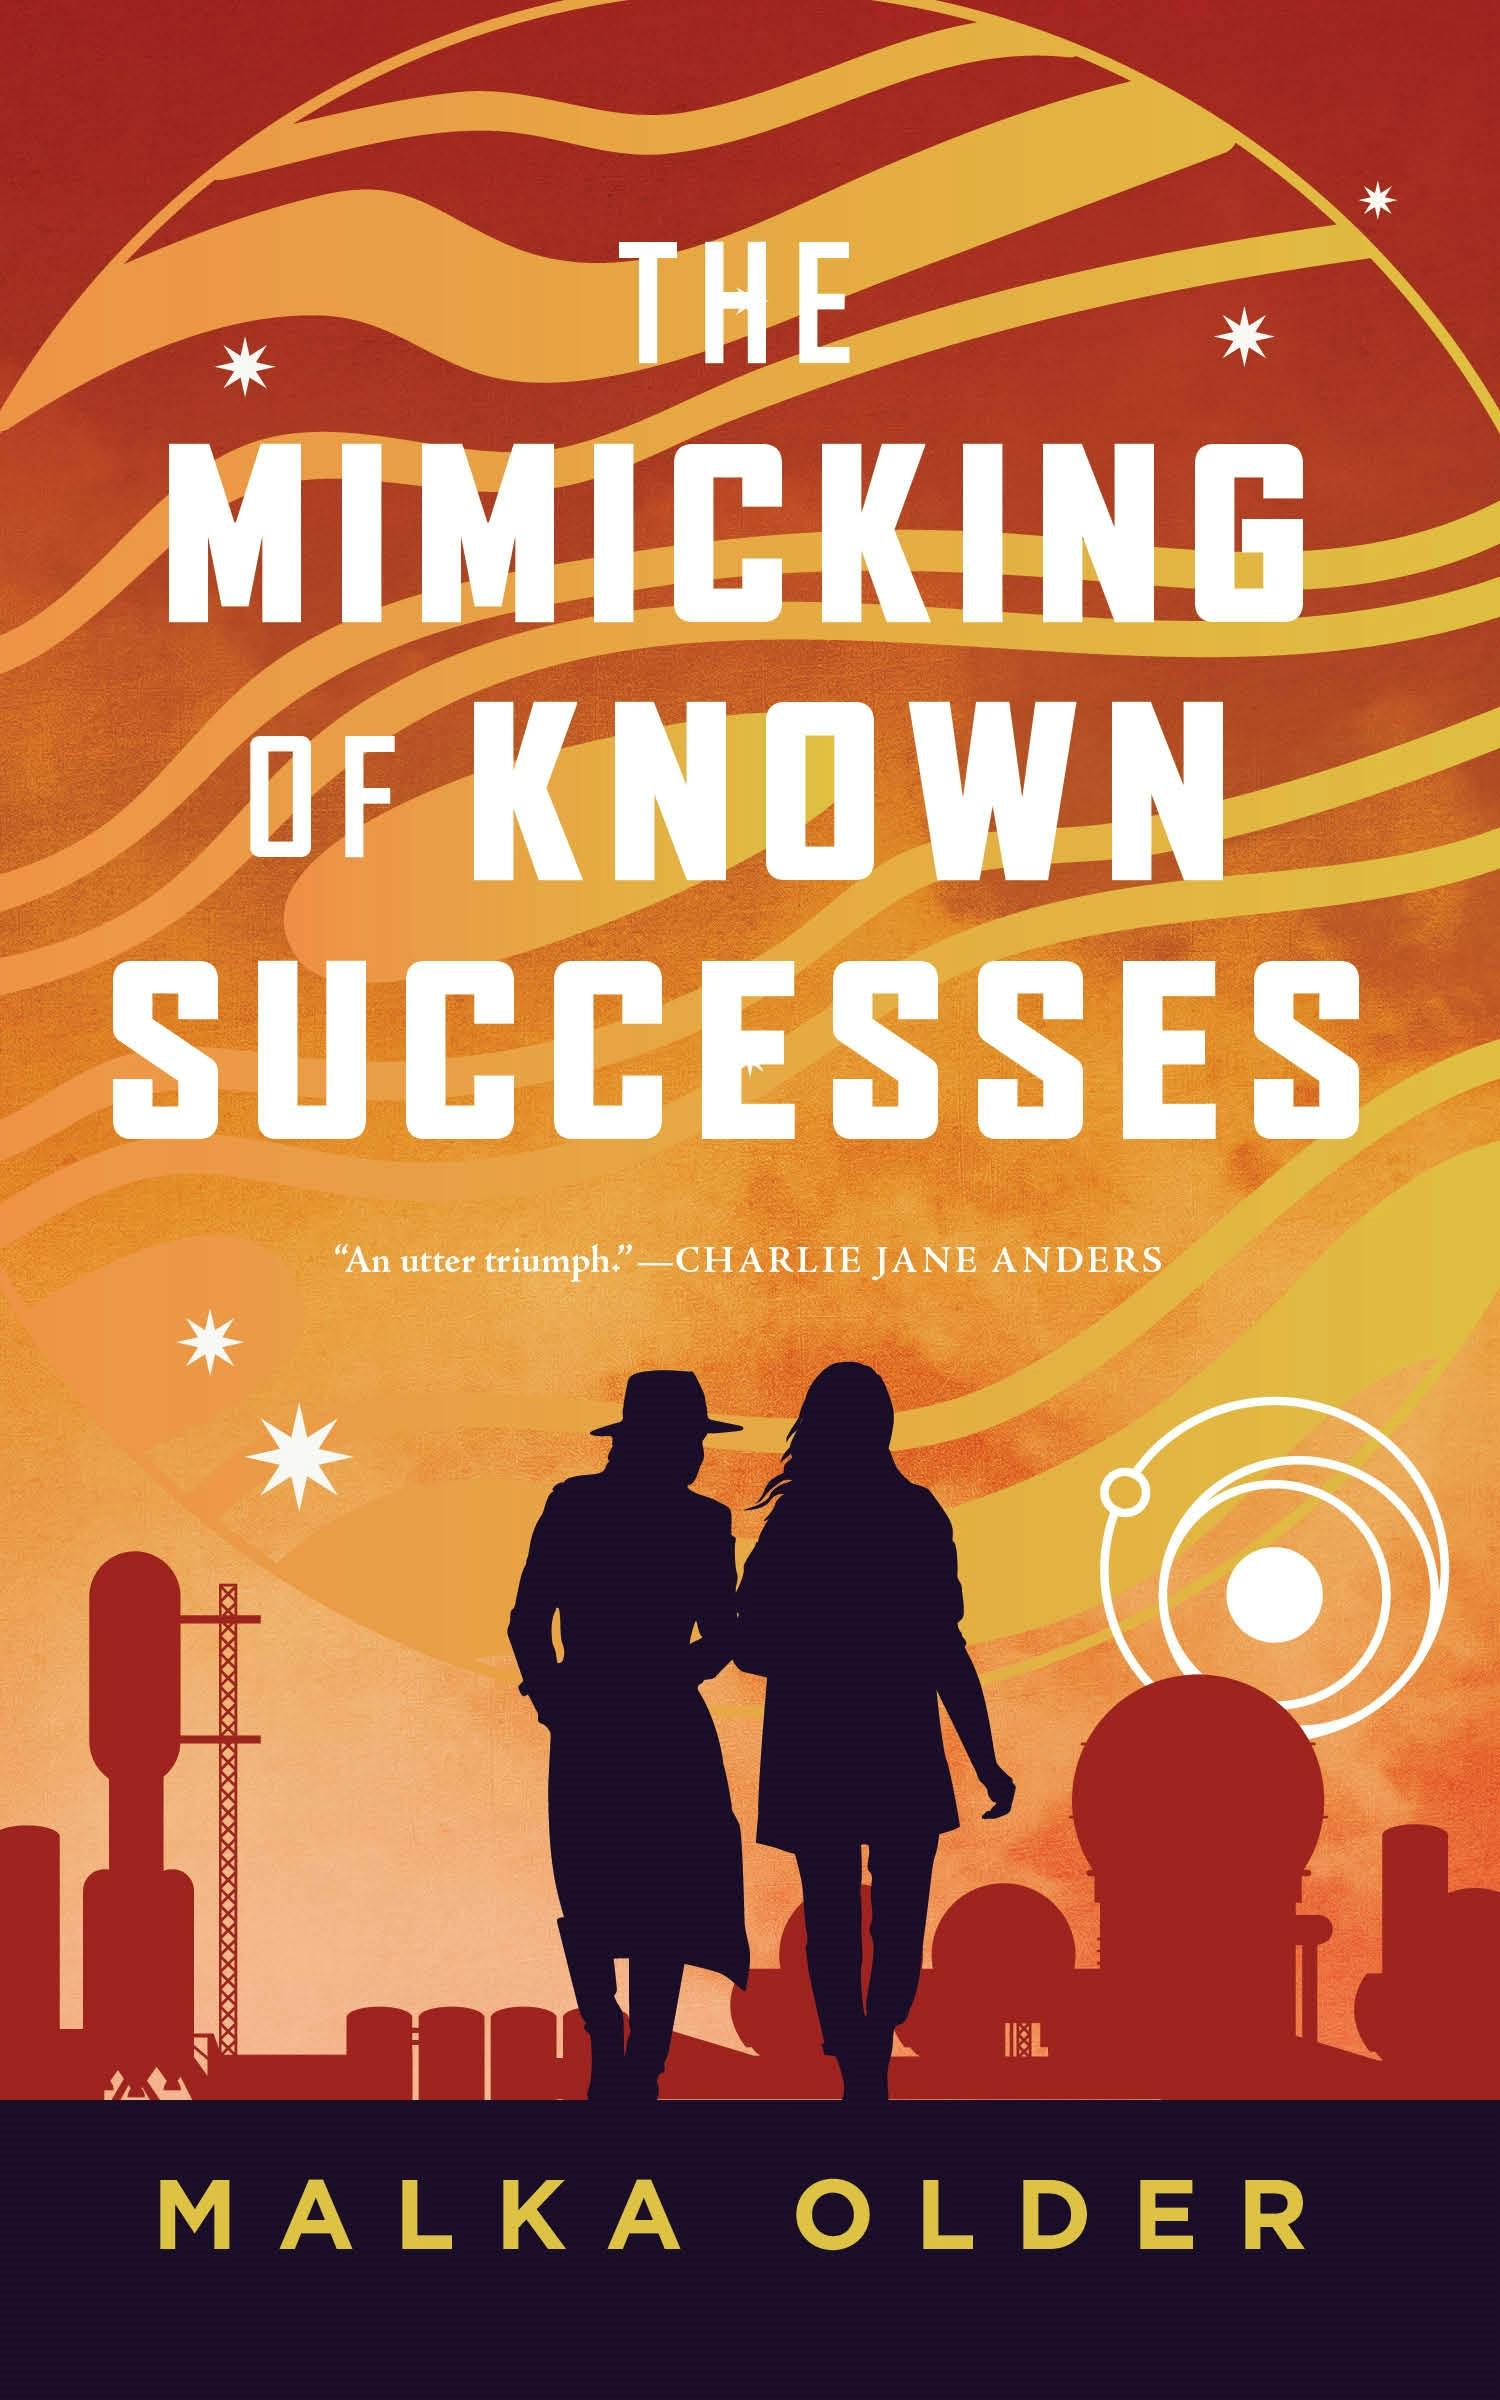 Cover for the book titled as: The Mimicking of Known Successes